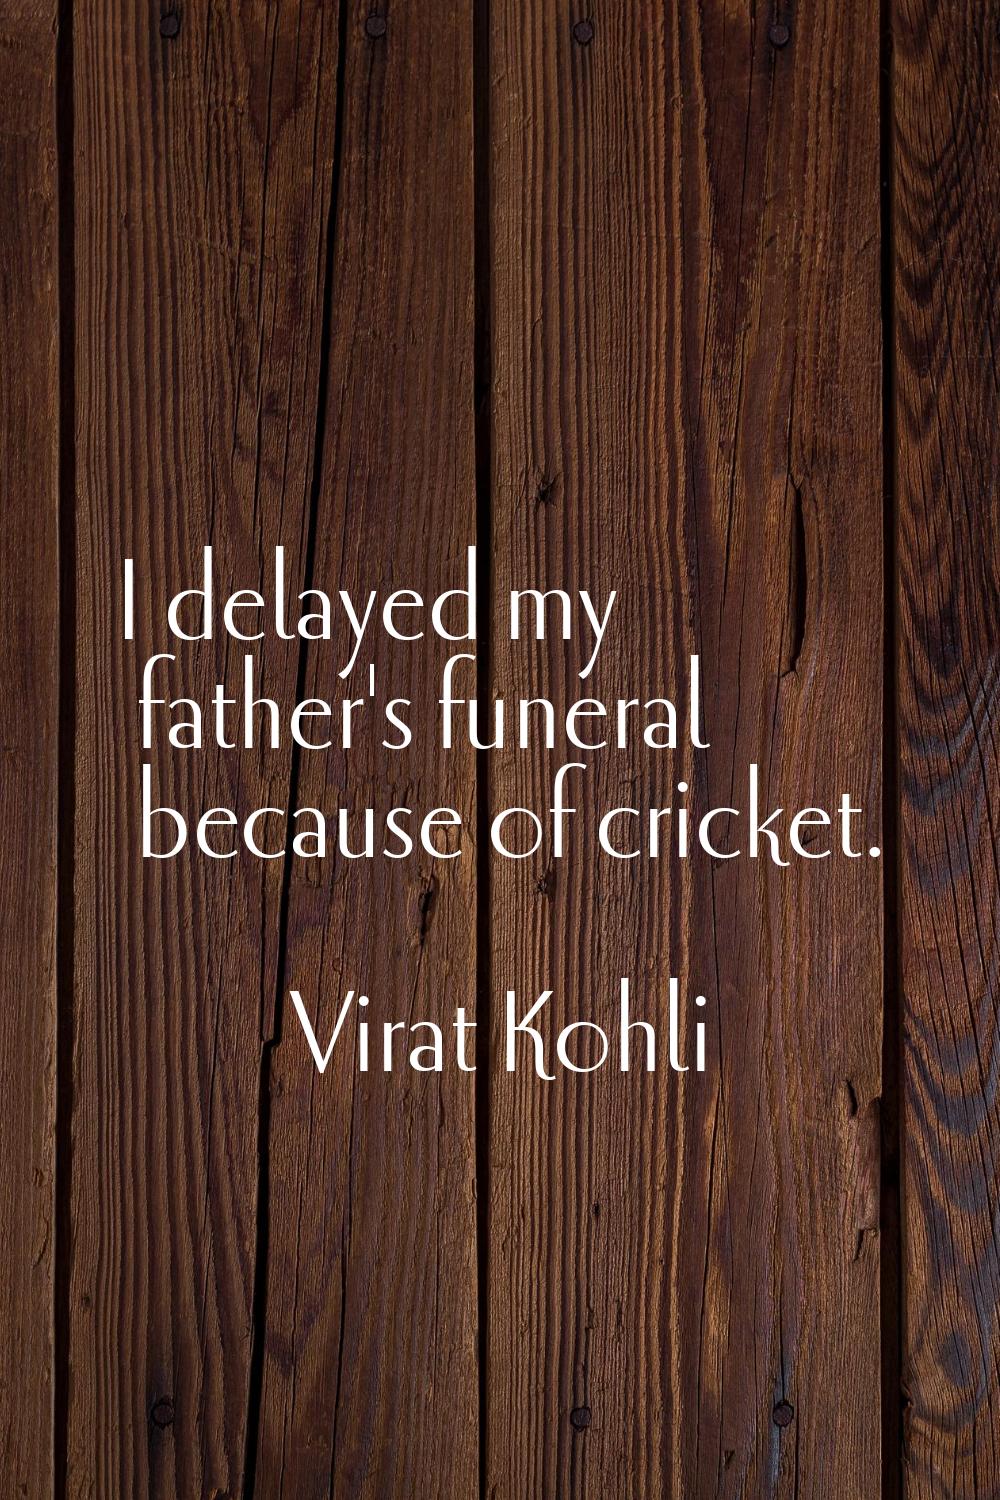 I delayed my father's funeral because of cricket.